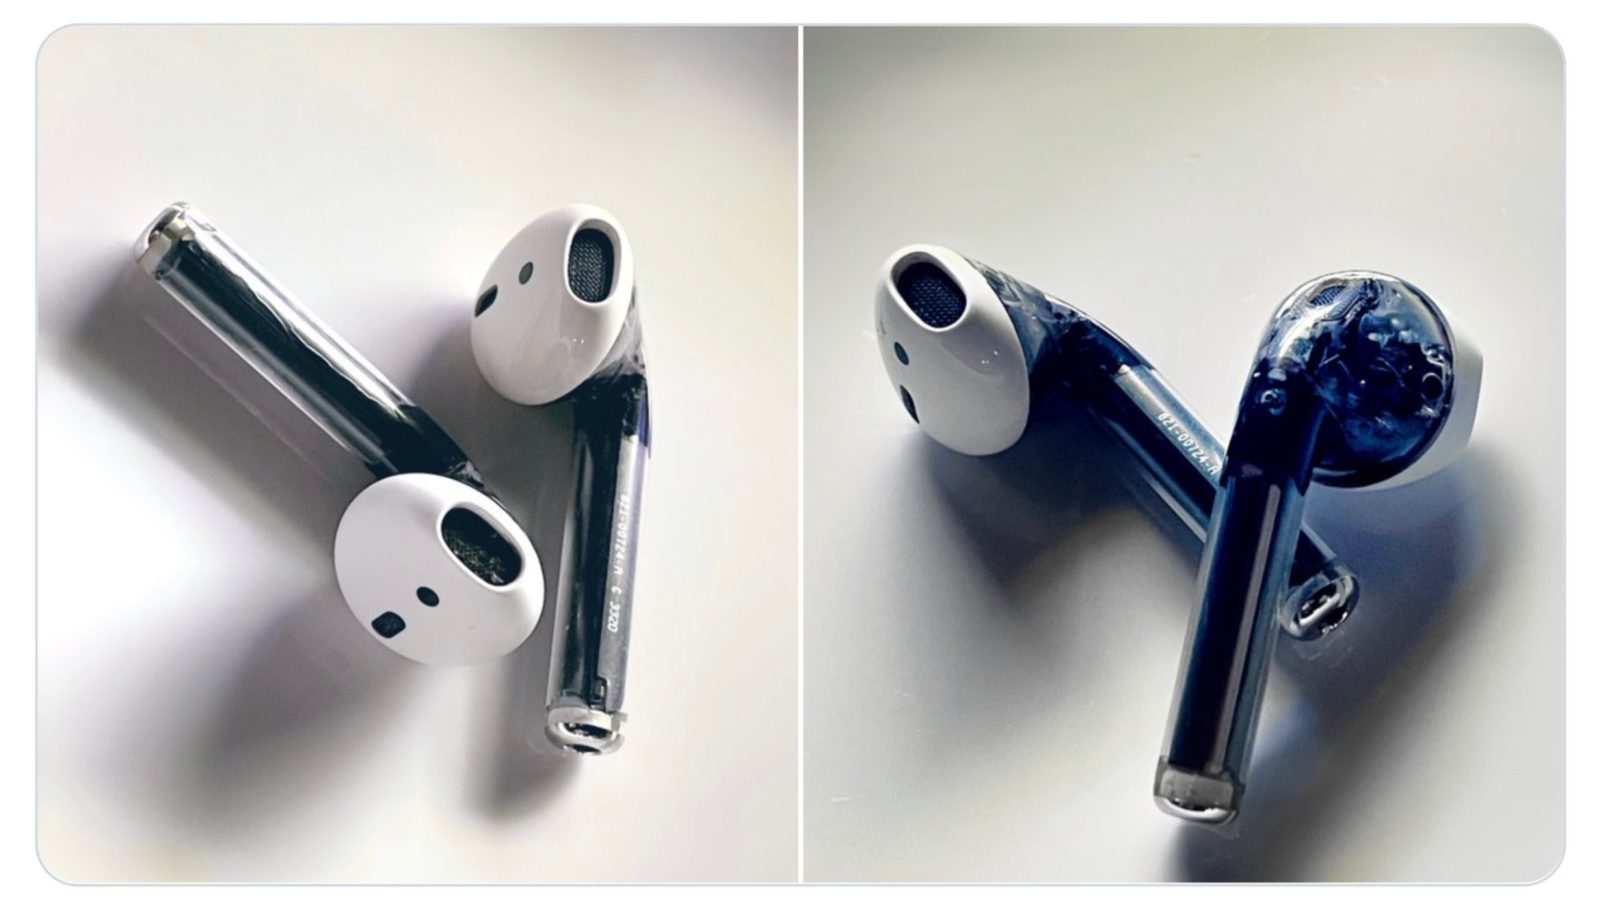 photo of New images show AirPods prototype with translucent design, more image